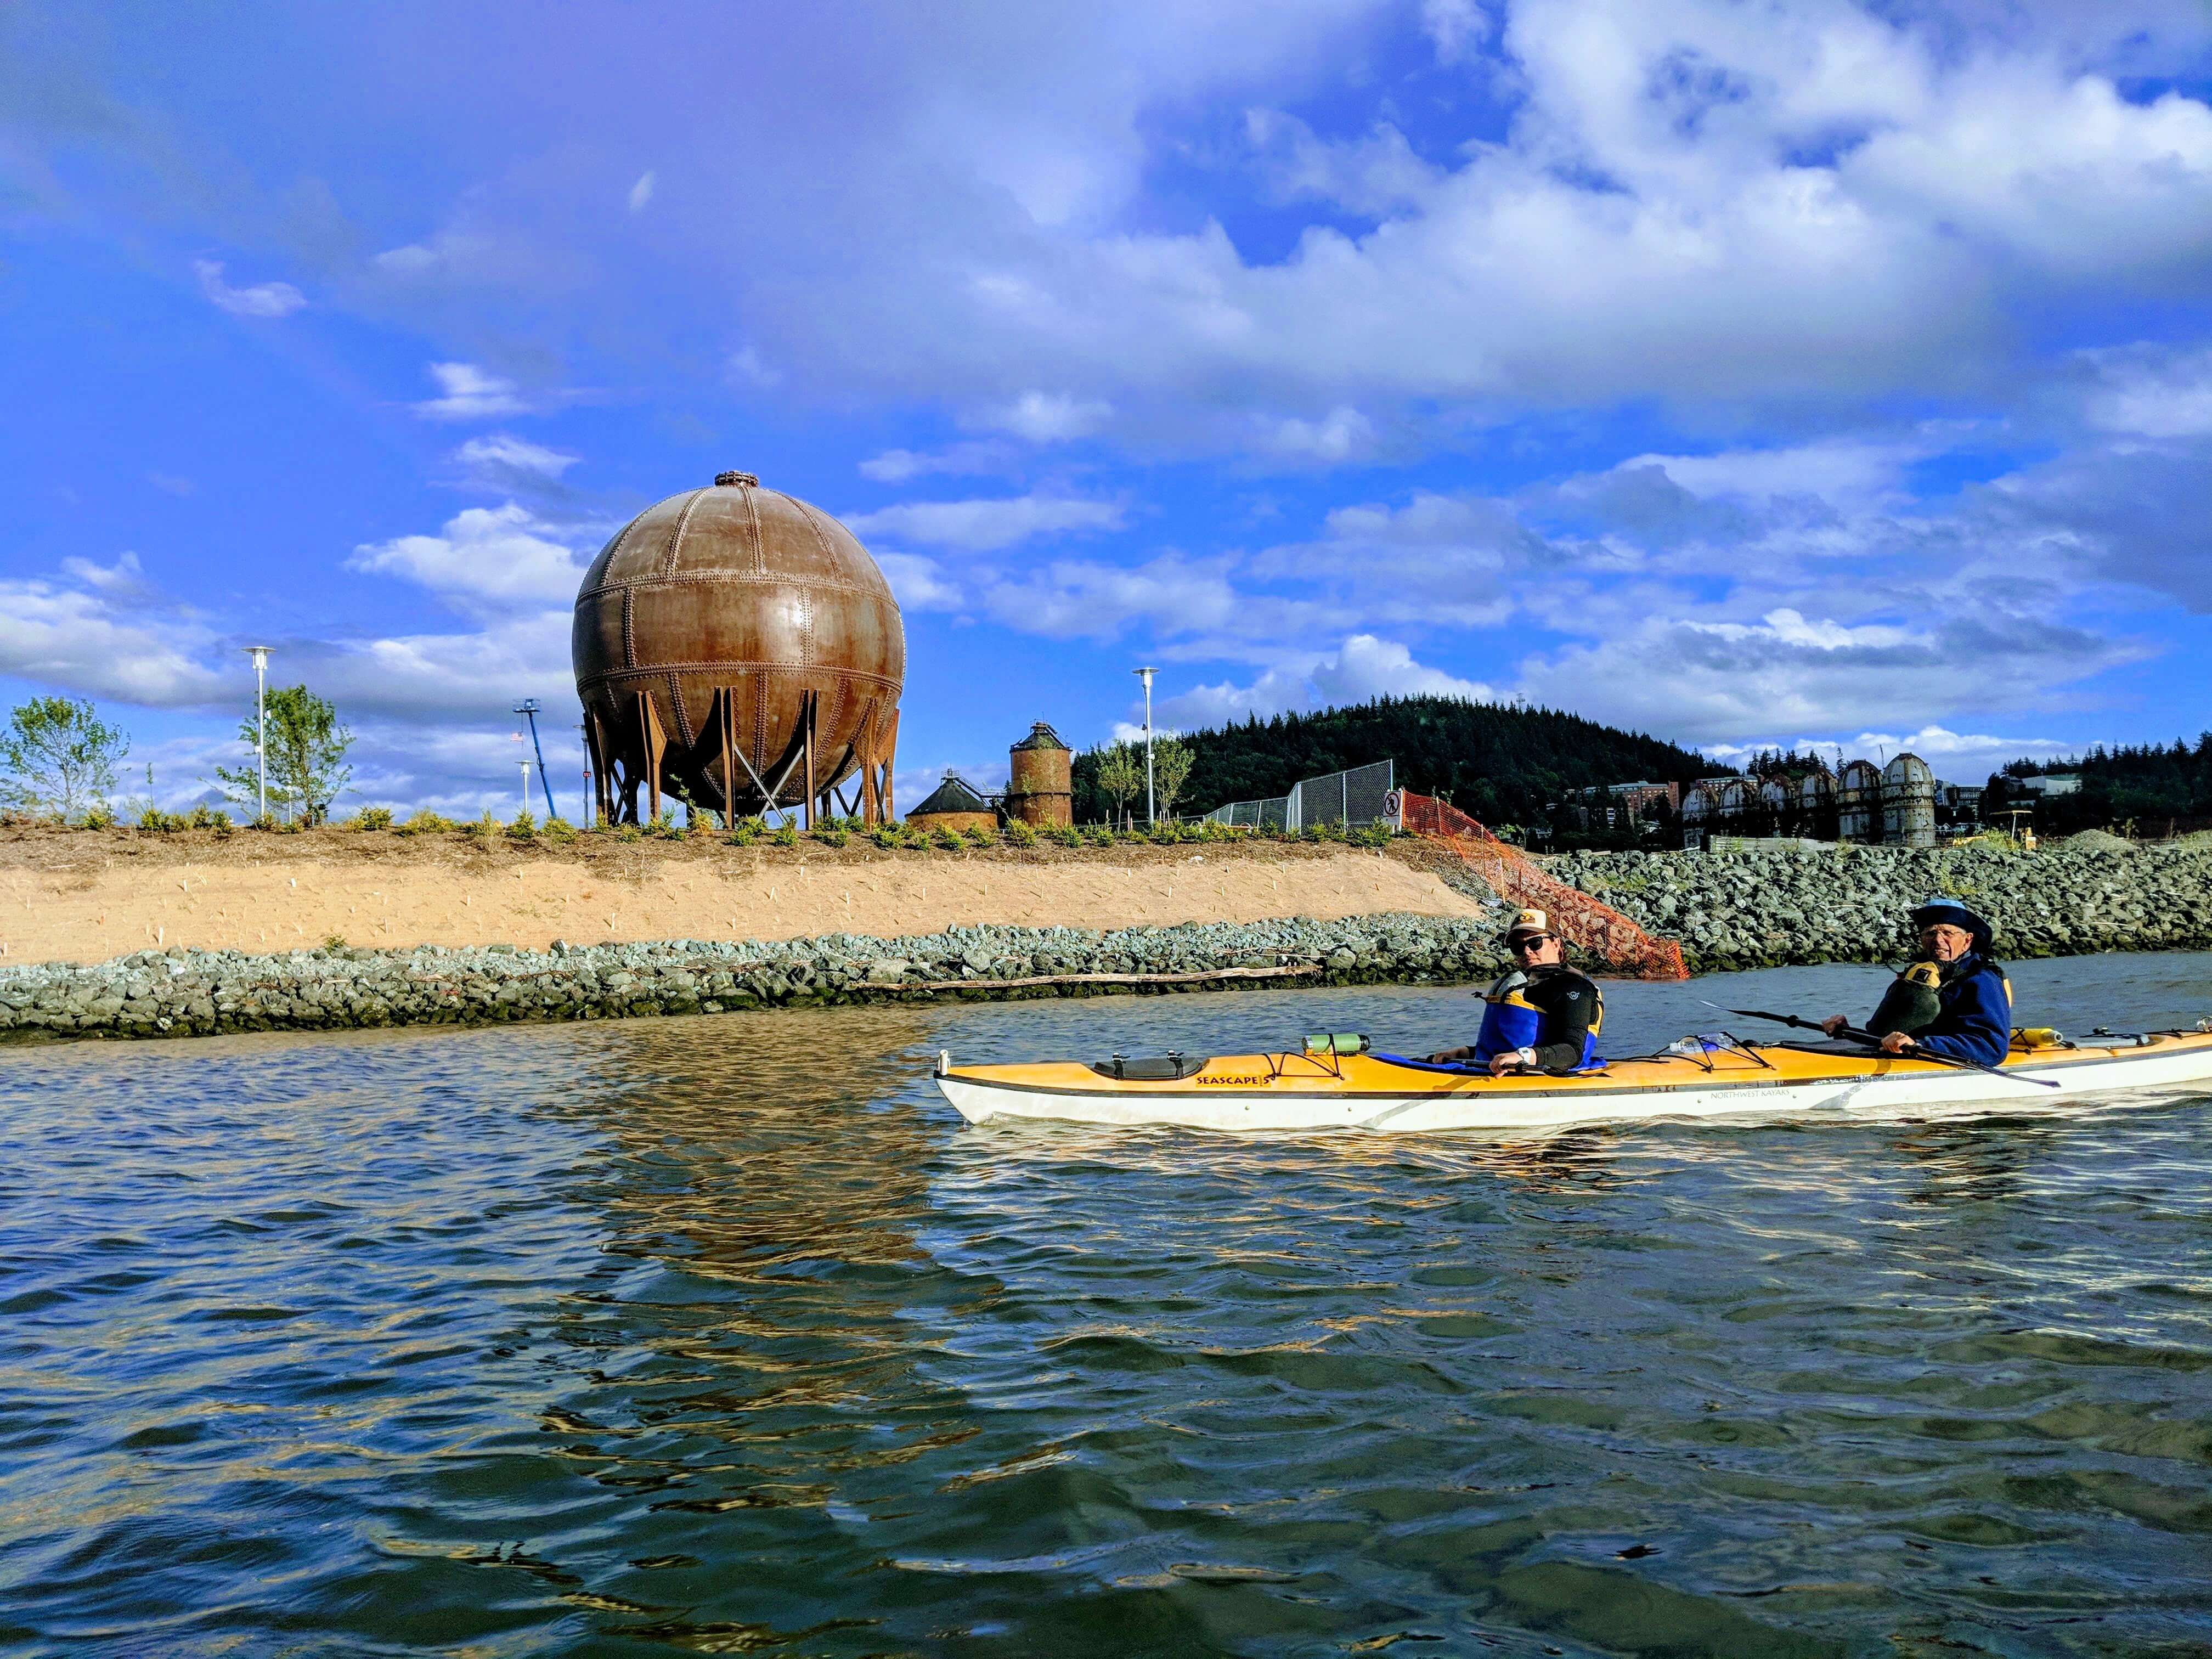 Two people in a kayak on the water. Behind them is a small beach and a large rusty metal sphere, a relic of old waterfront industry.